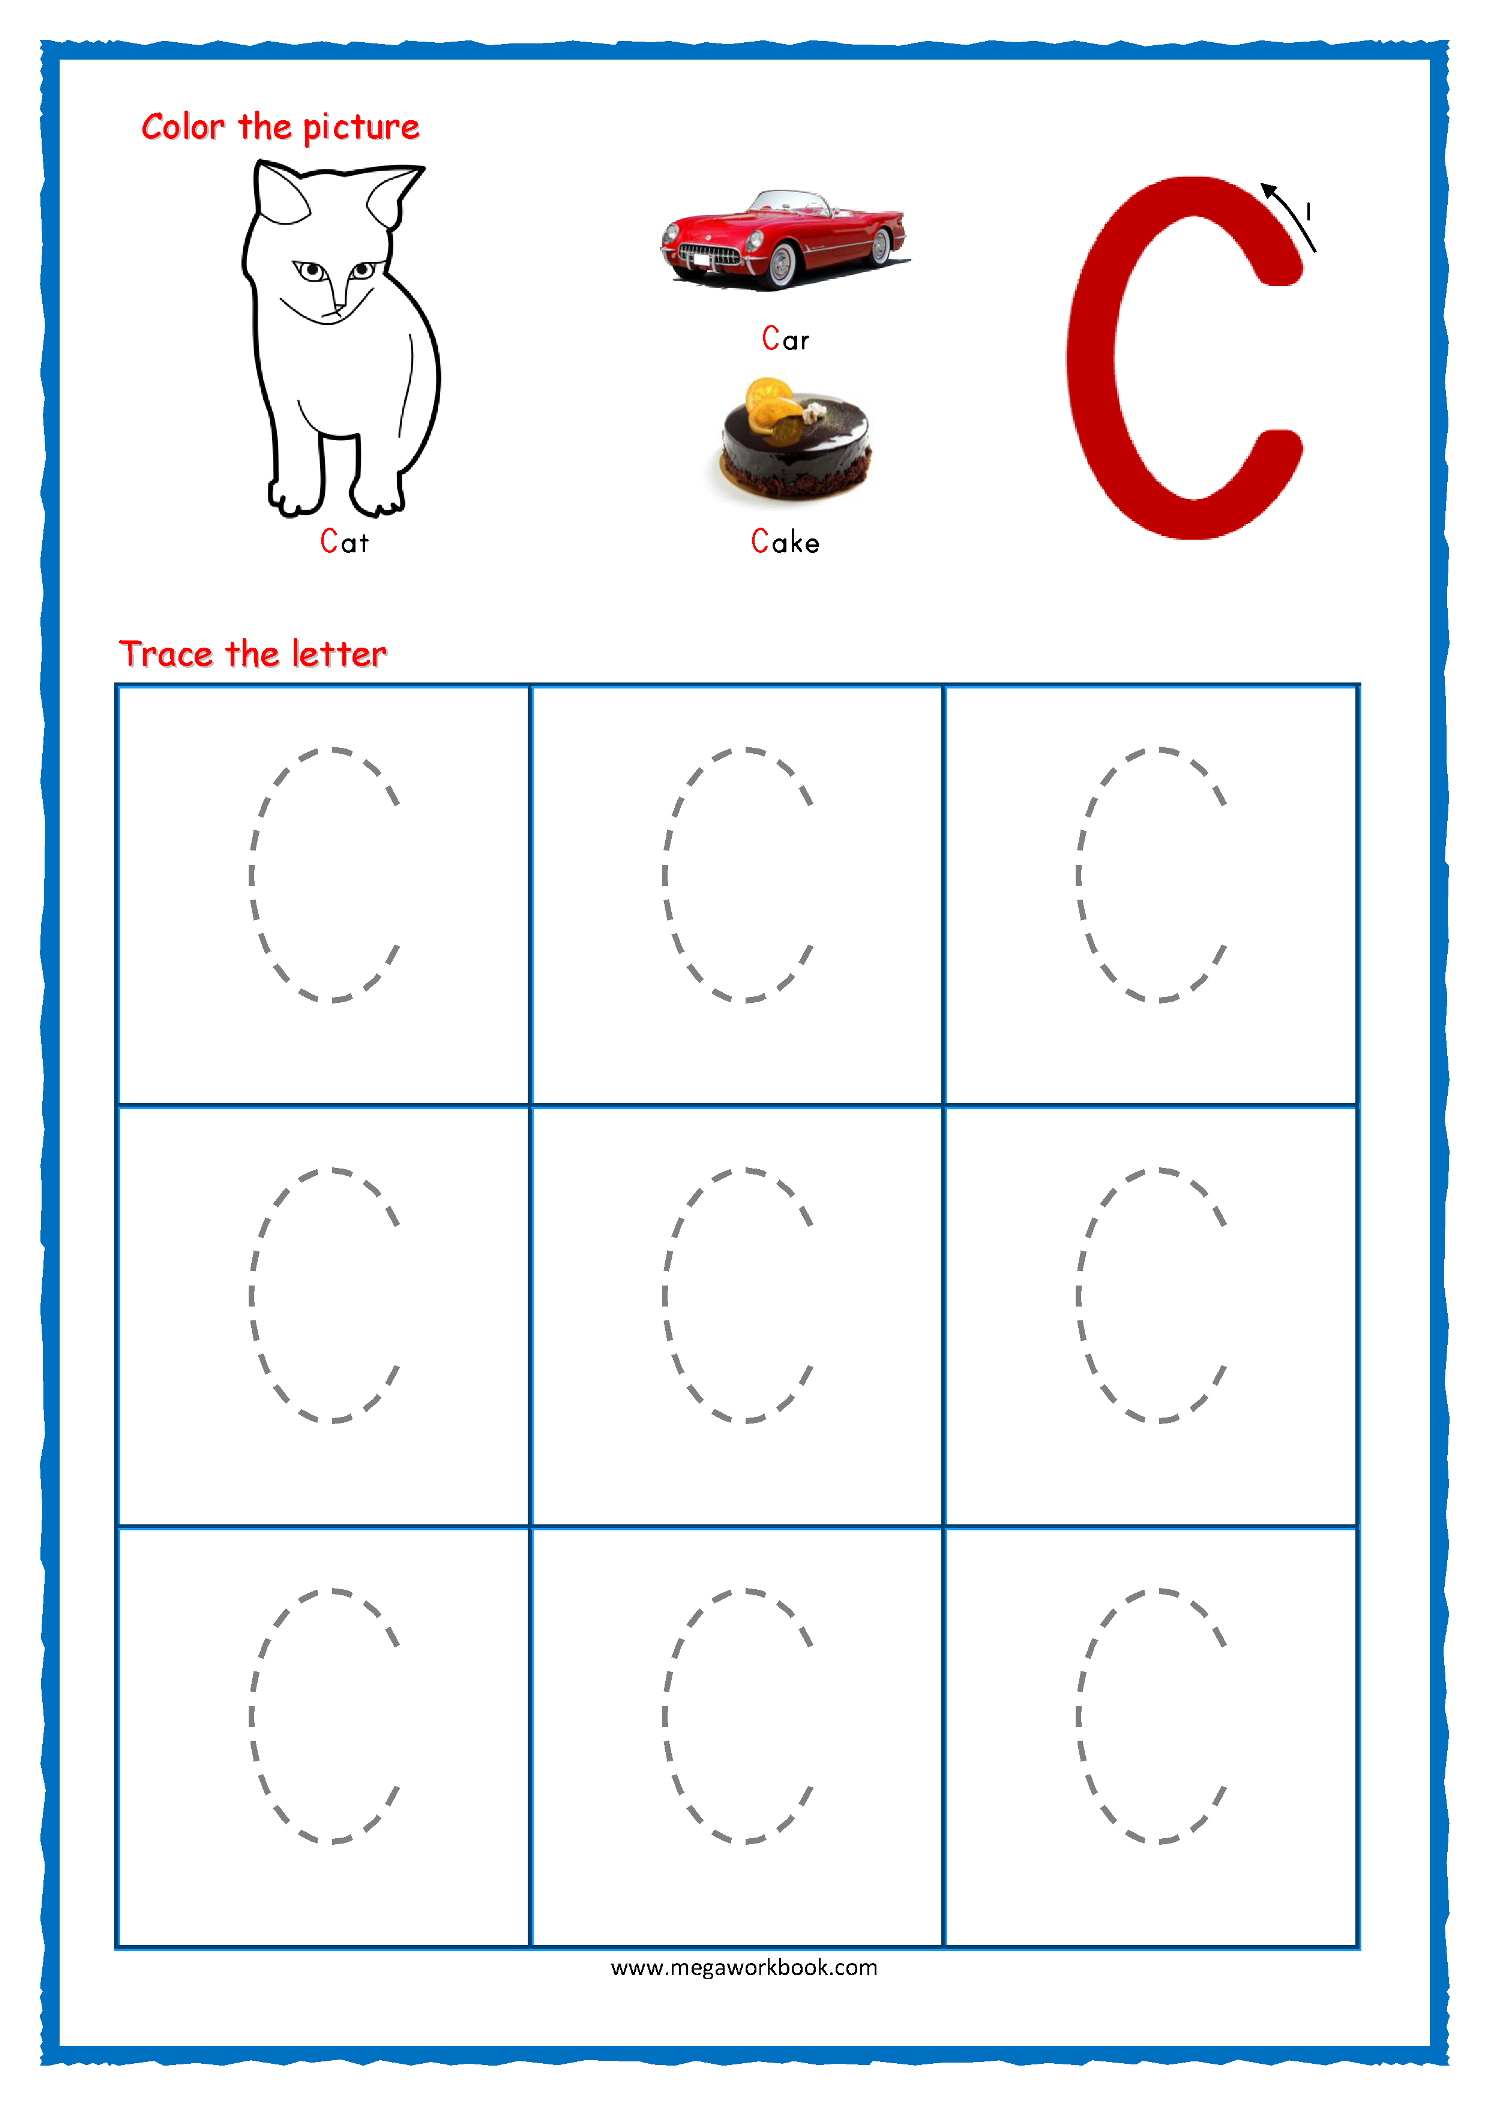 Tracing Letters - Alphabet Tracing - Capital Letters throughout Preschool Tracing Letters Free Worksheets